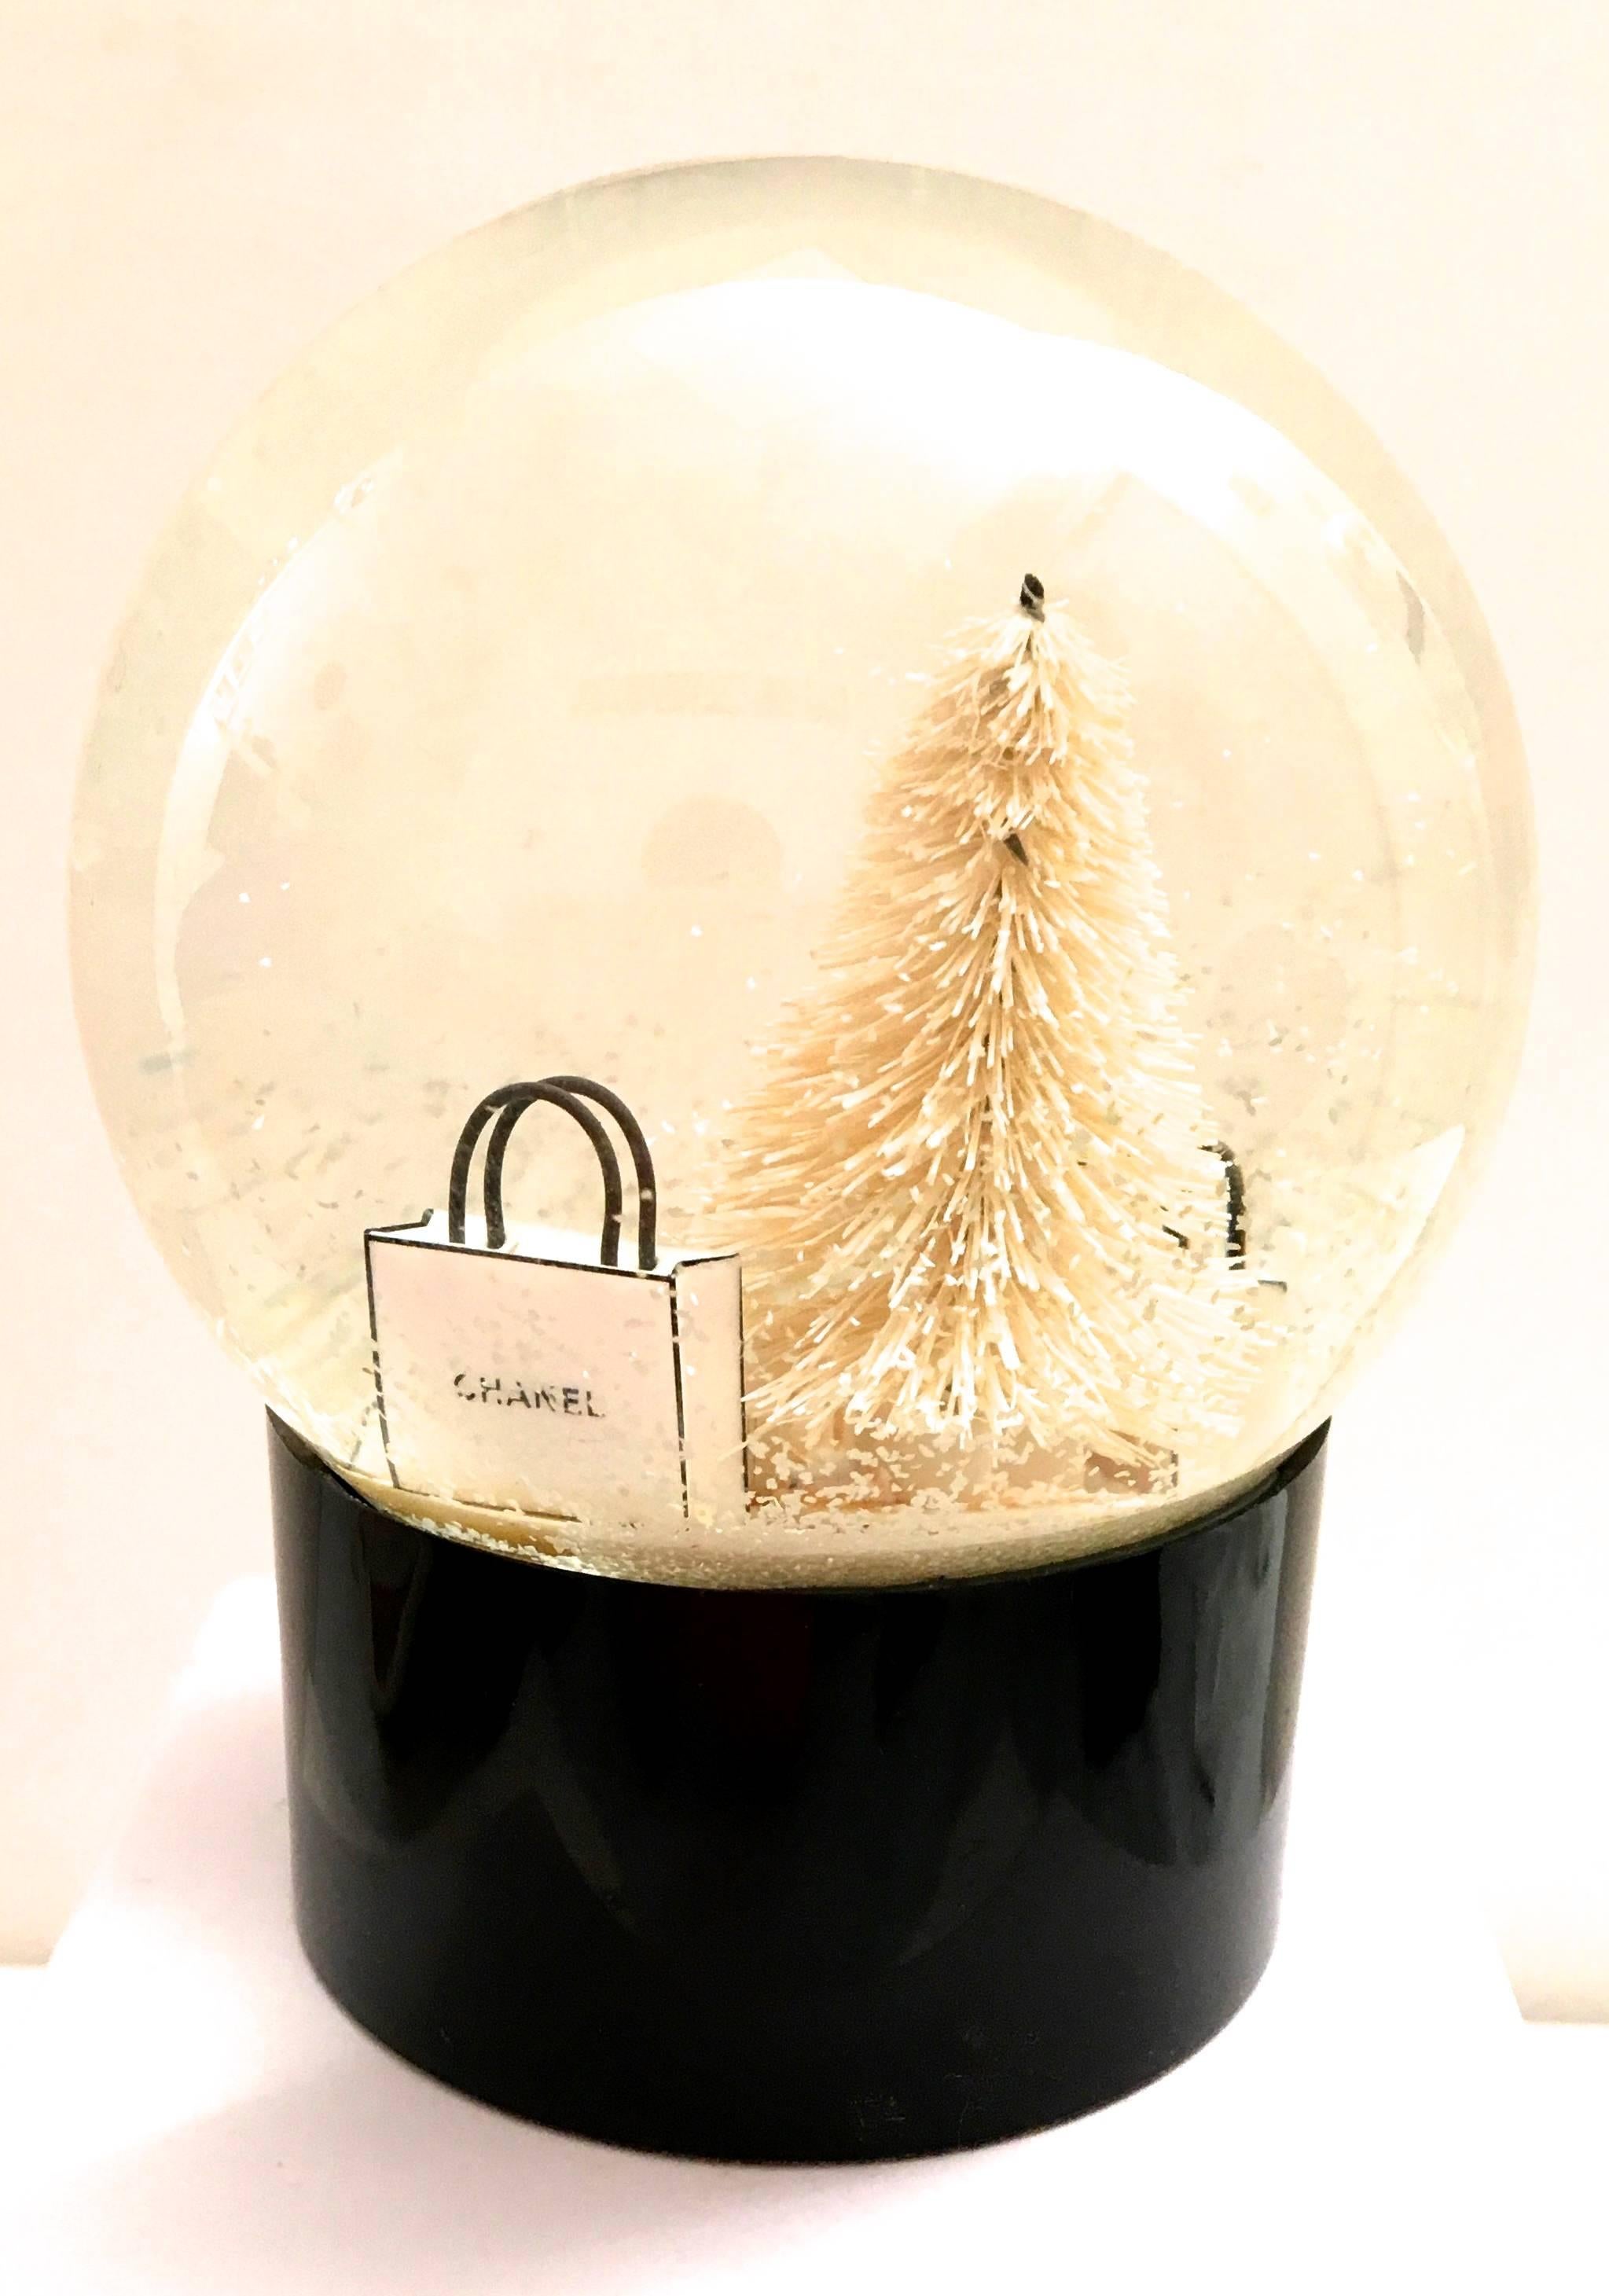 Presented here is a rare Chanel snow globe. The globe is comprised of a glass snow globe set atop a black base that is signed 'Chanel.' The snow globe has a white tree inside the glass surrounded by packages and bags that are signed 'Chanel.'    The